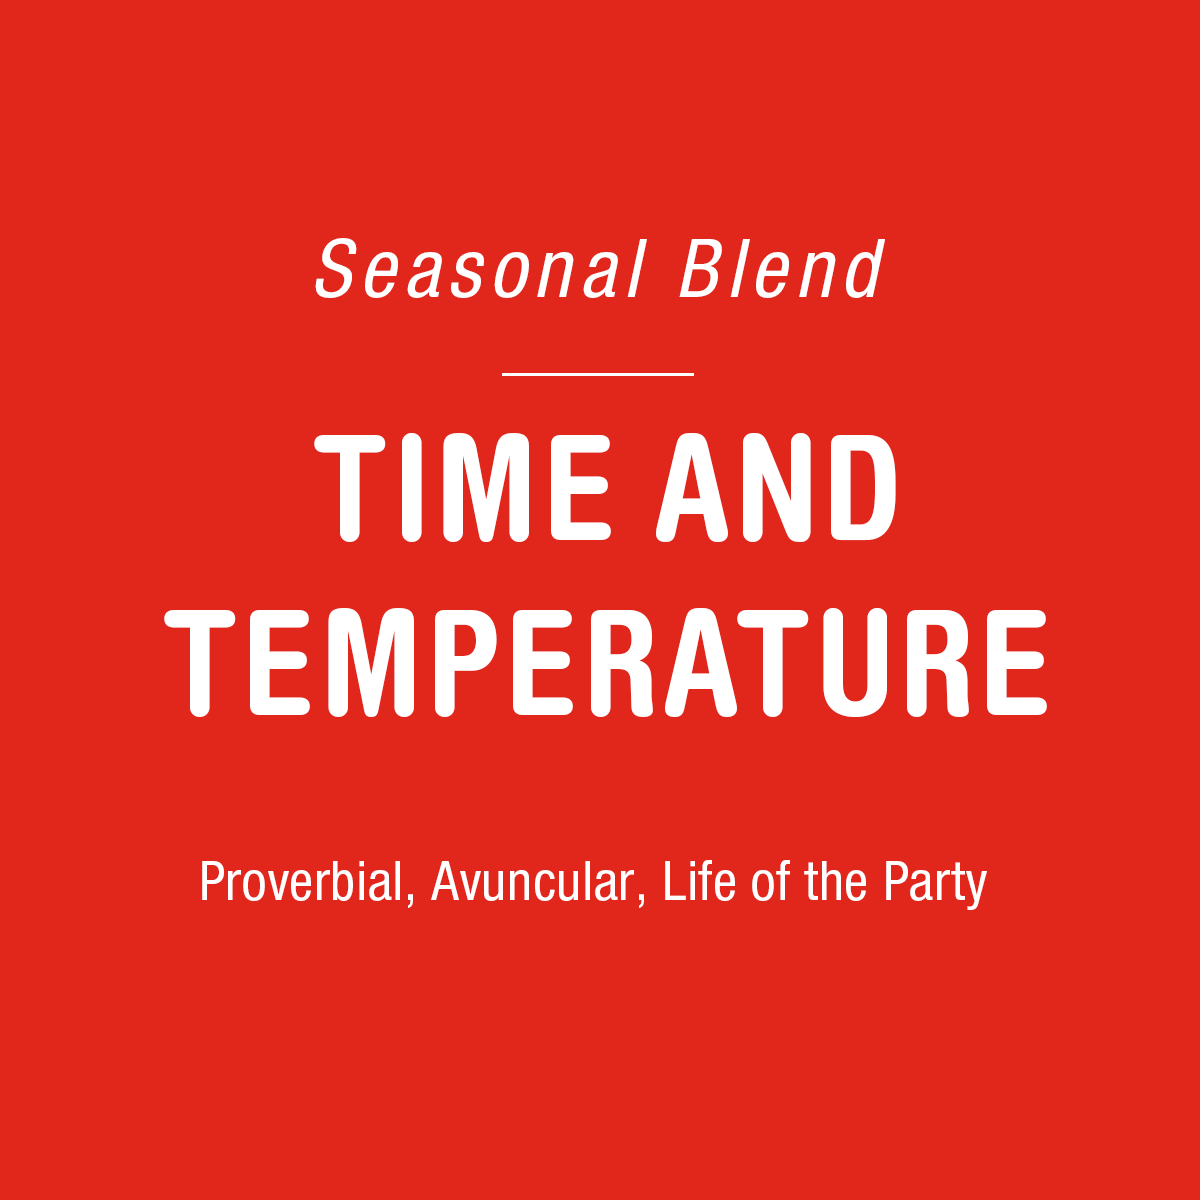 White text on a red background that reads "espresso blend Tandem Time & Temperature" with the words "proverbial, avuncular, life of the party" beneath.